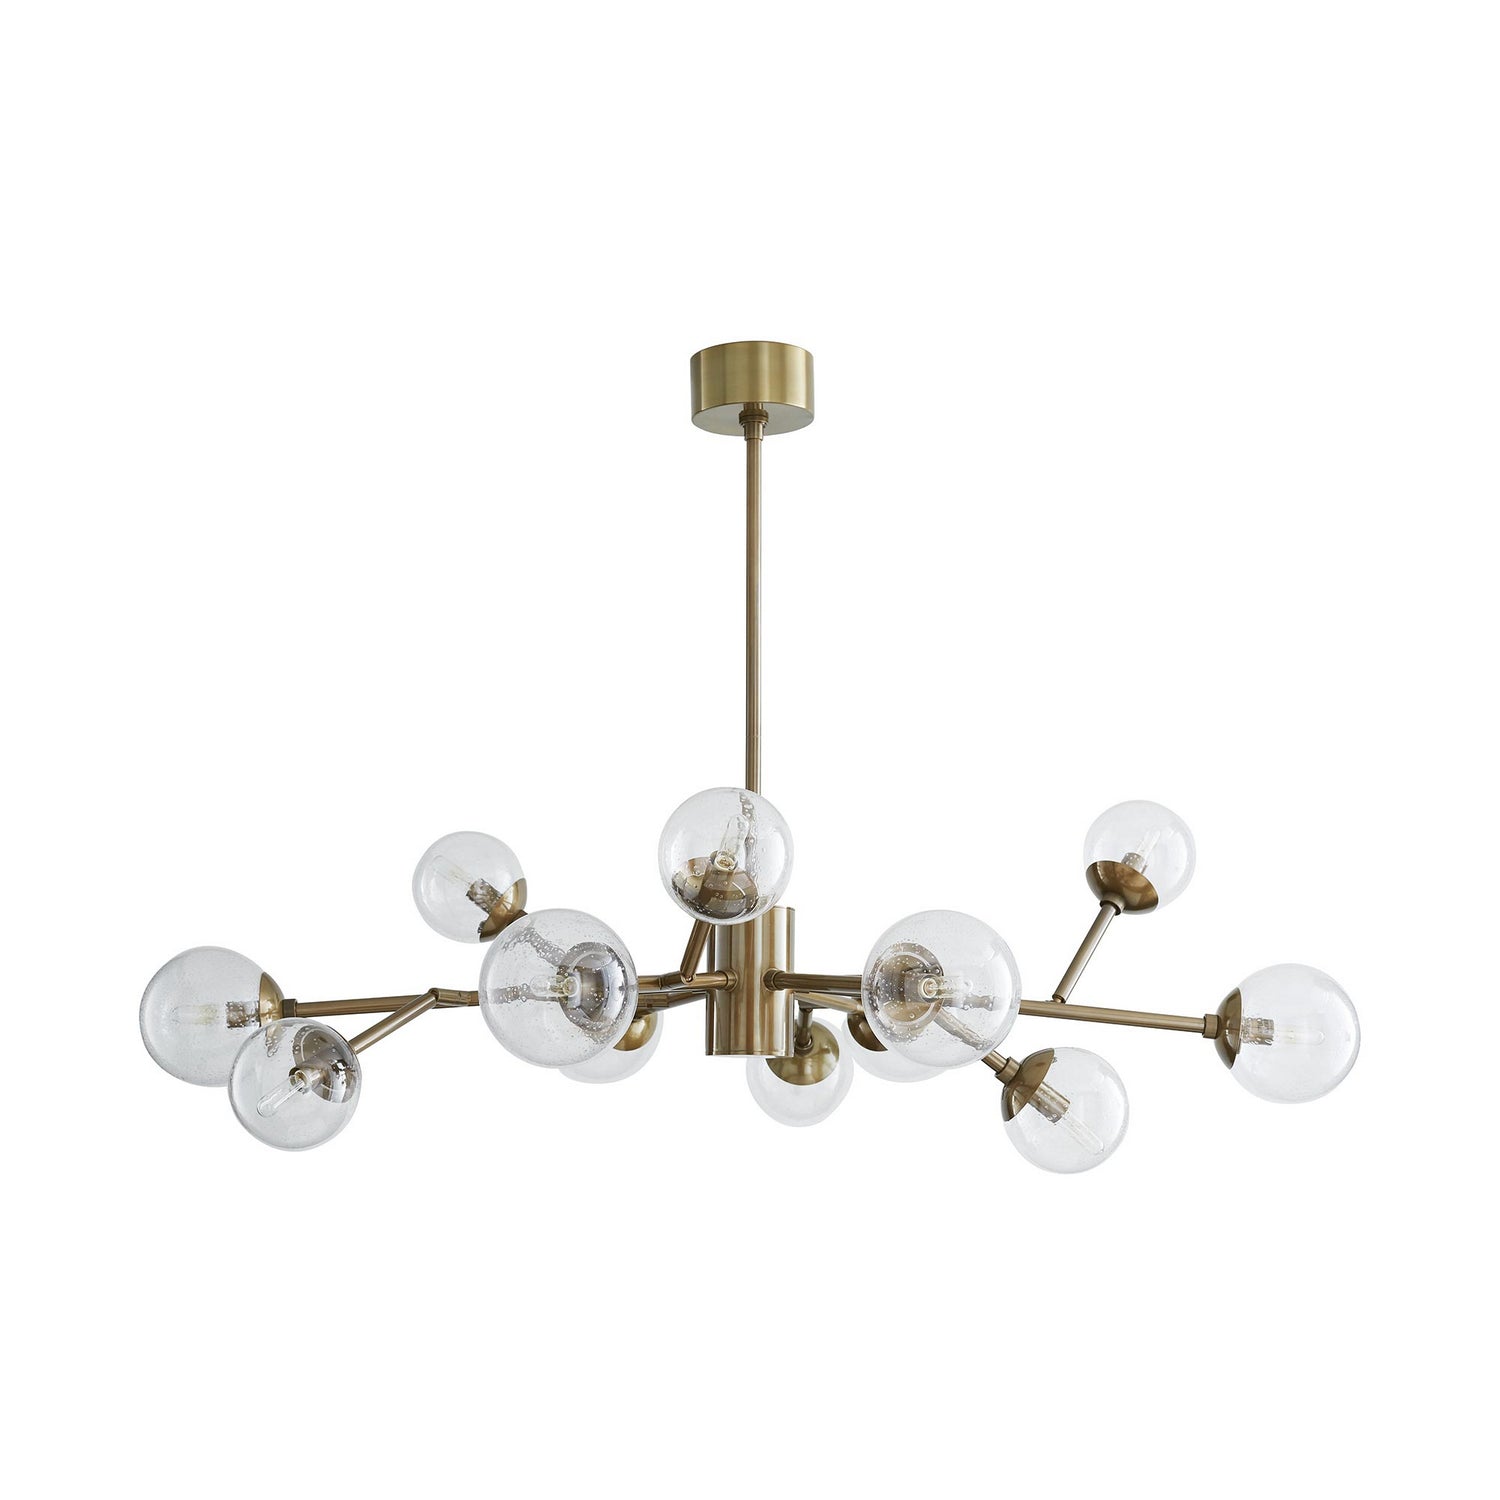 12 Light Chandelier from the Dallas collection in Vintage Brass finish